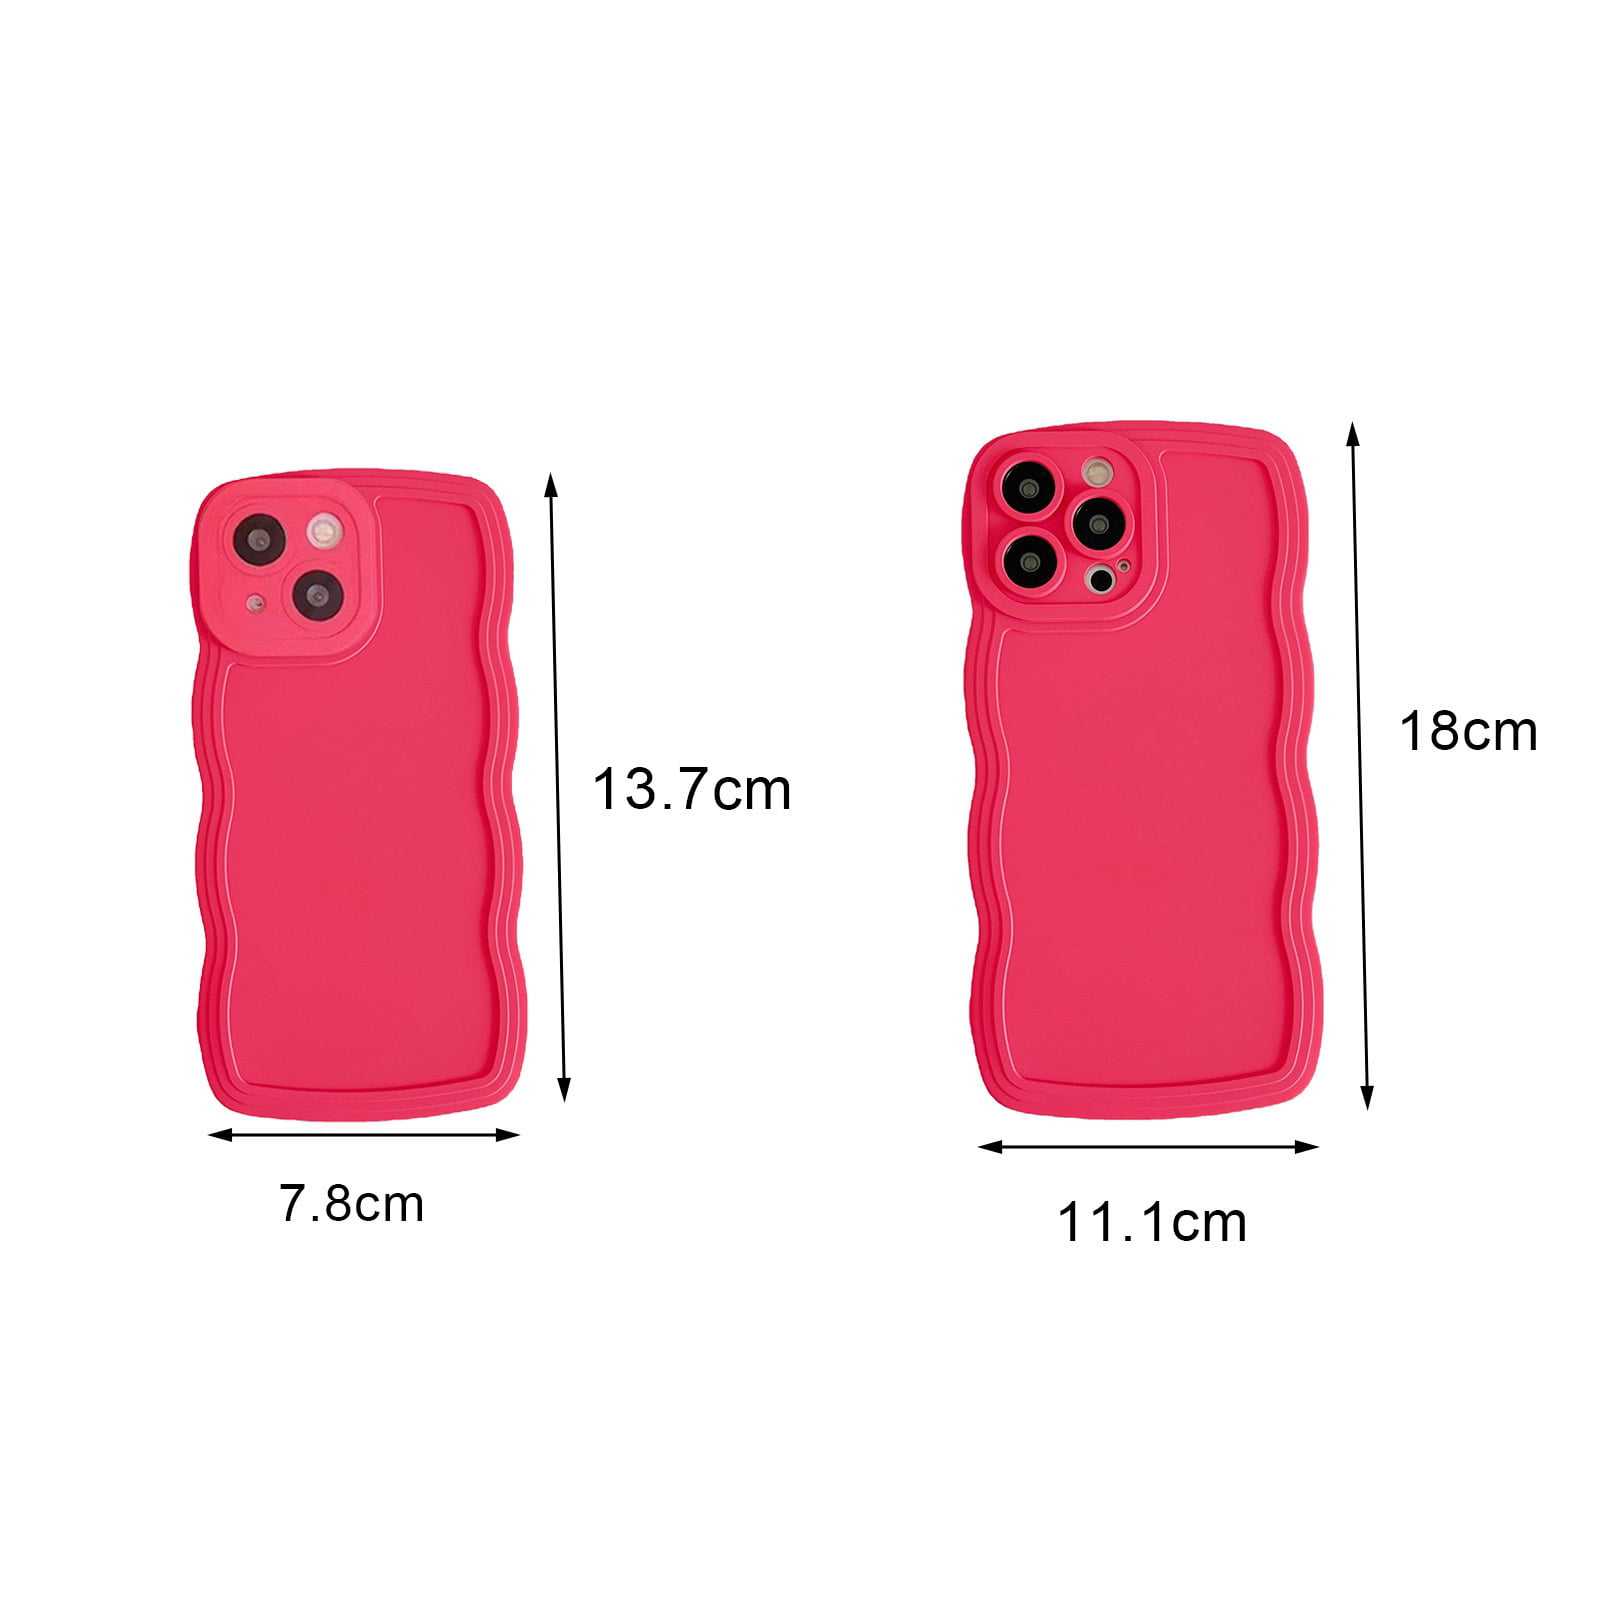 Jmltech Square Edge Case, for iPhone 14 Pro Max Case Silicone Protective  Slim Thin Shockproof Flexible Women Girls Cute Phone Case for iPhone 14 Pro